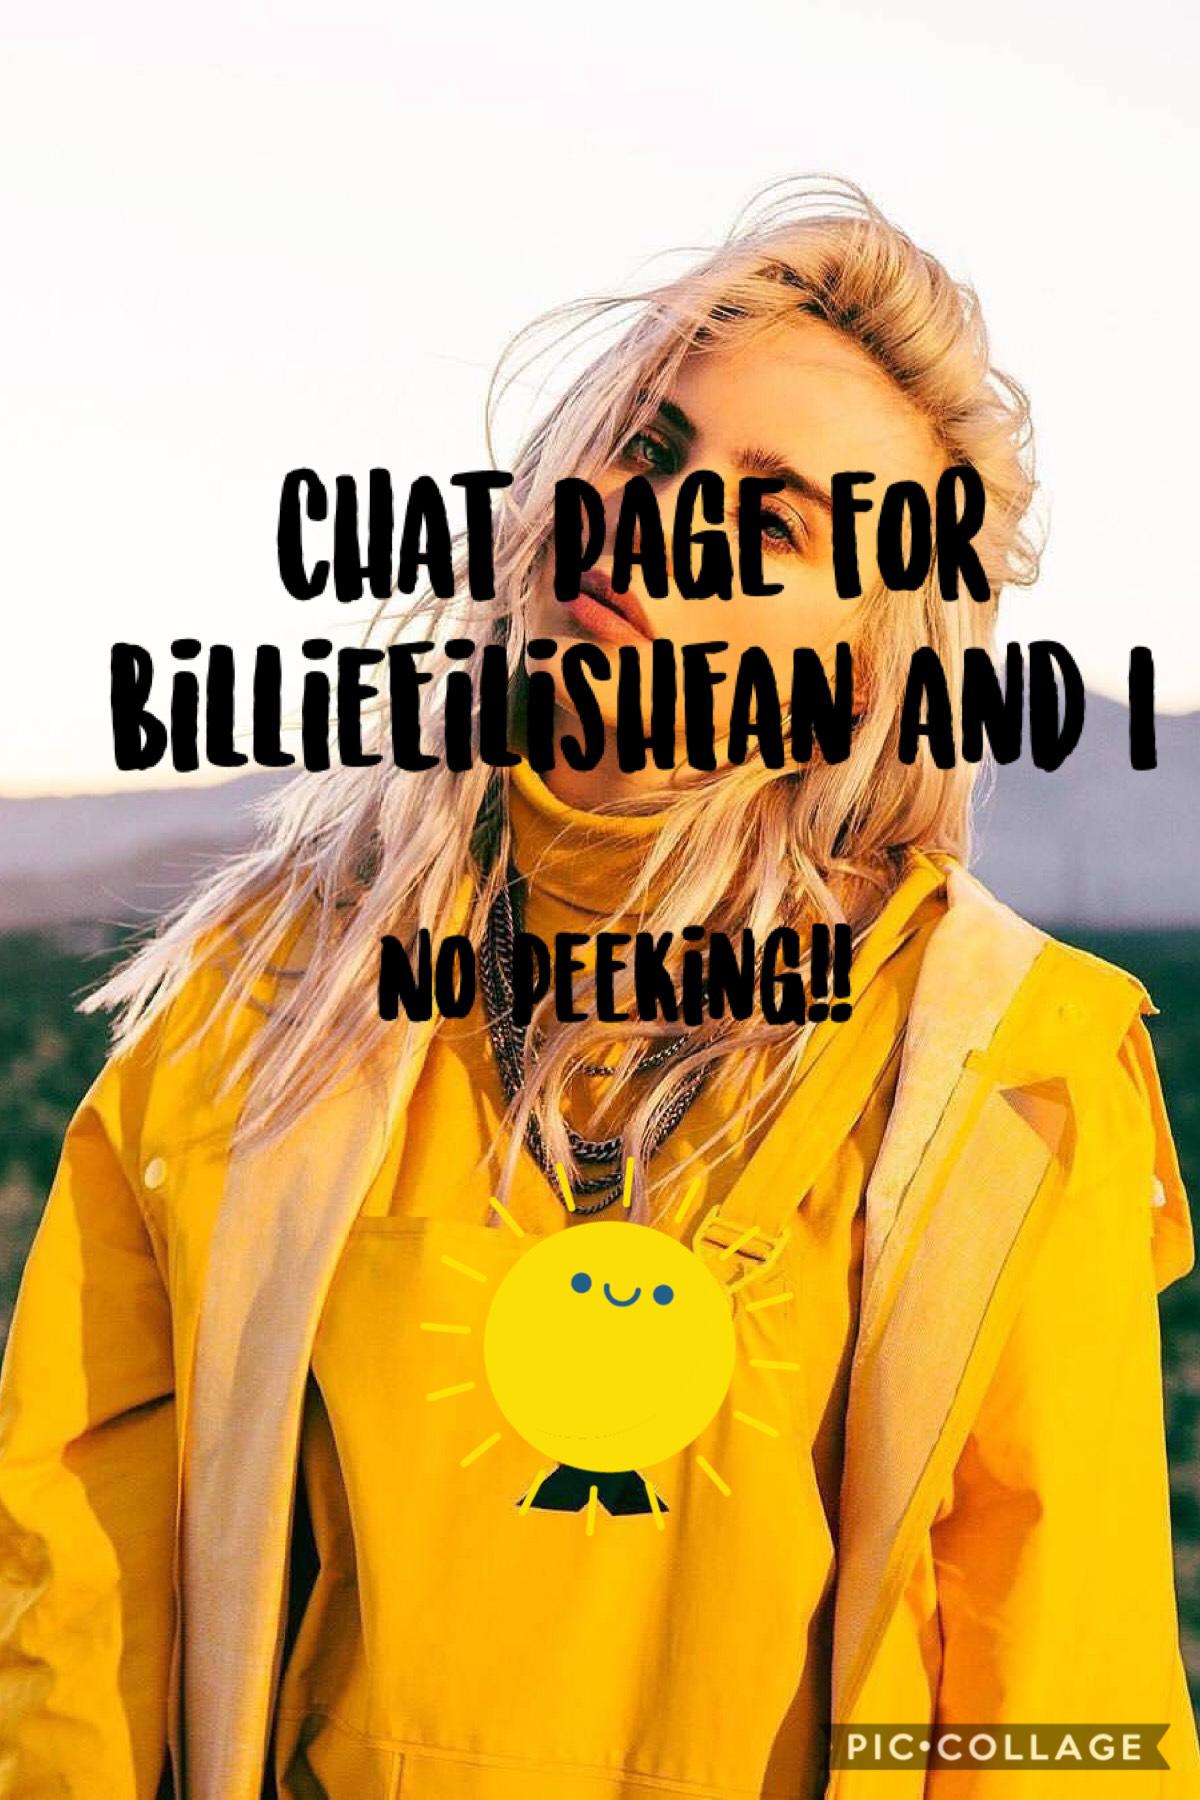 Chat page for BillieEilishFan and I